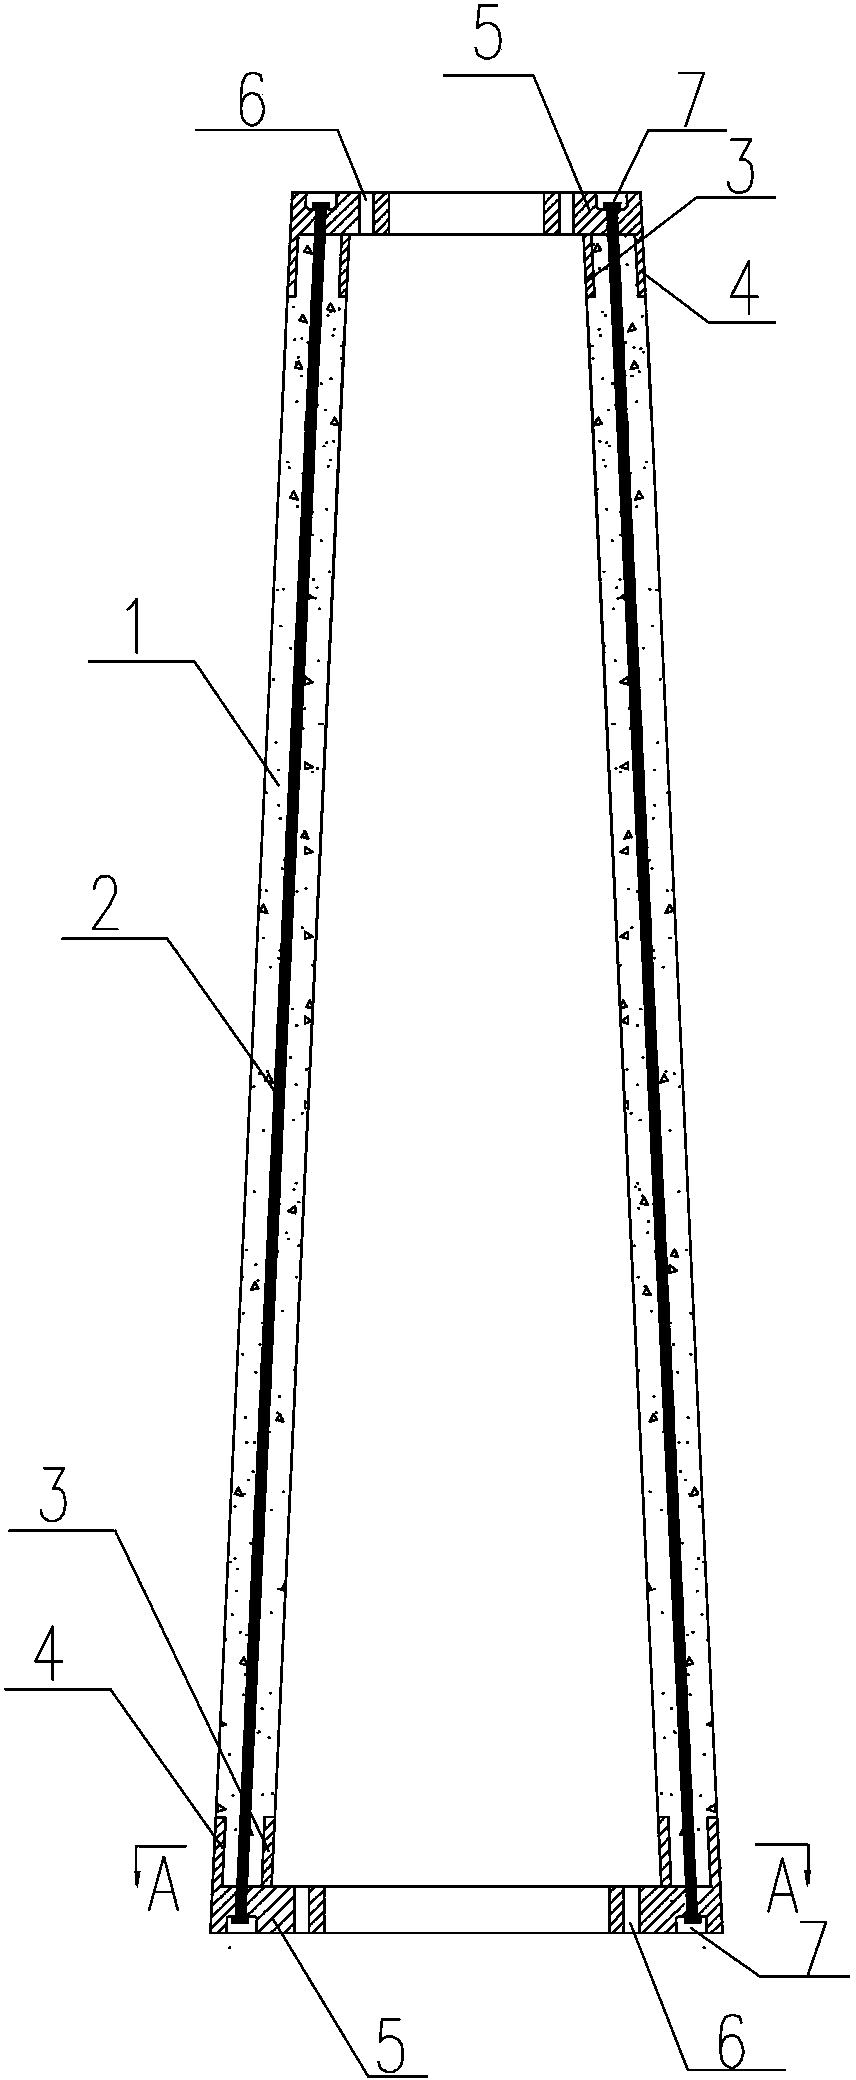 Prestressed concrete rod section with two ends in inner flange connection